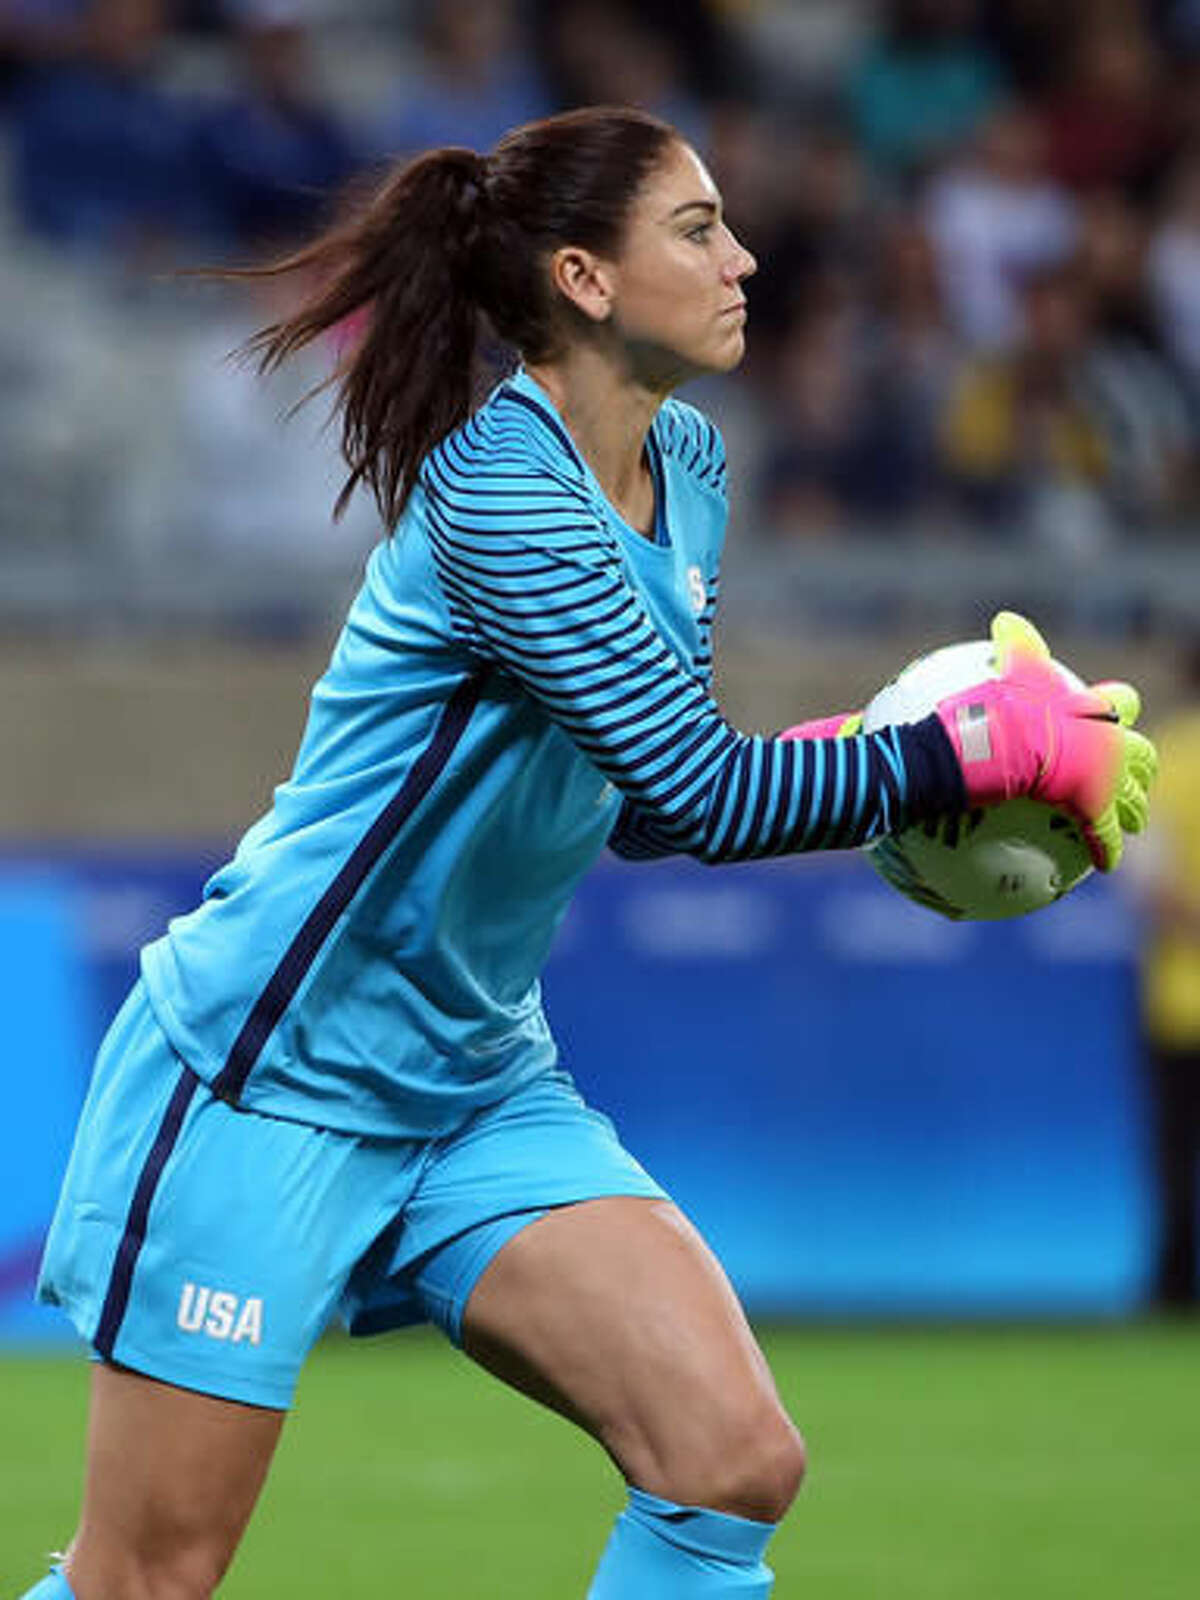 United States goalkeeper Hope Solo holds the ball during a women's Olympic football tournament match against New Zealand at the Mineirao stadium in Belo Horizonte, Brazil, Wednesday, Aug. 3, 2016. Solo says she was not bothered by fans who chanted "Zika, Zika" at her as the U.S. women's soccer team defeated New Zealand in its Olympic debut on Wednesday. The crowd jeered the goalkeeper with the reference to the virus that has scared many athletes ahead of the Rio Games.(AP Photo/Eugenio Savio)